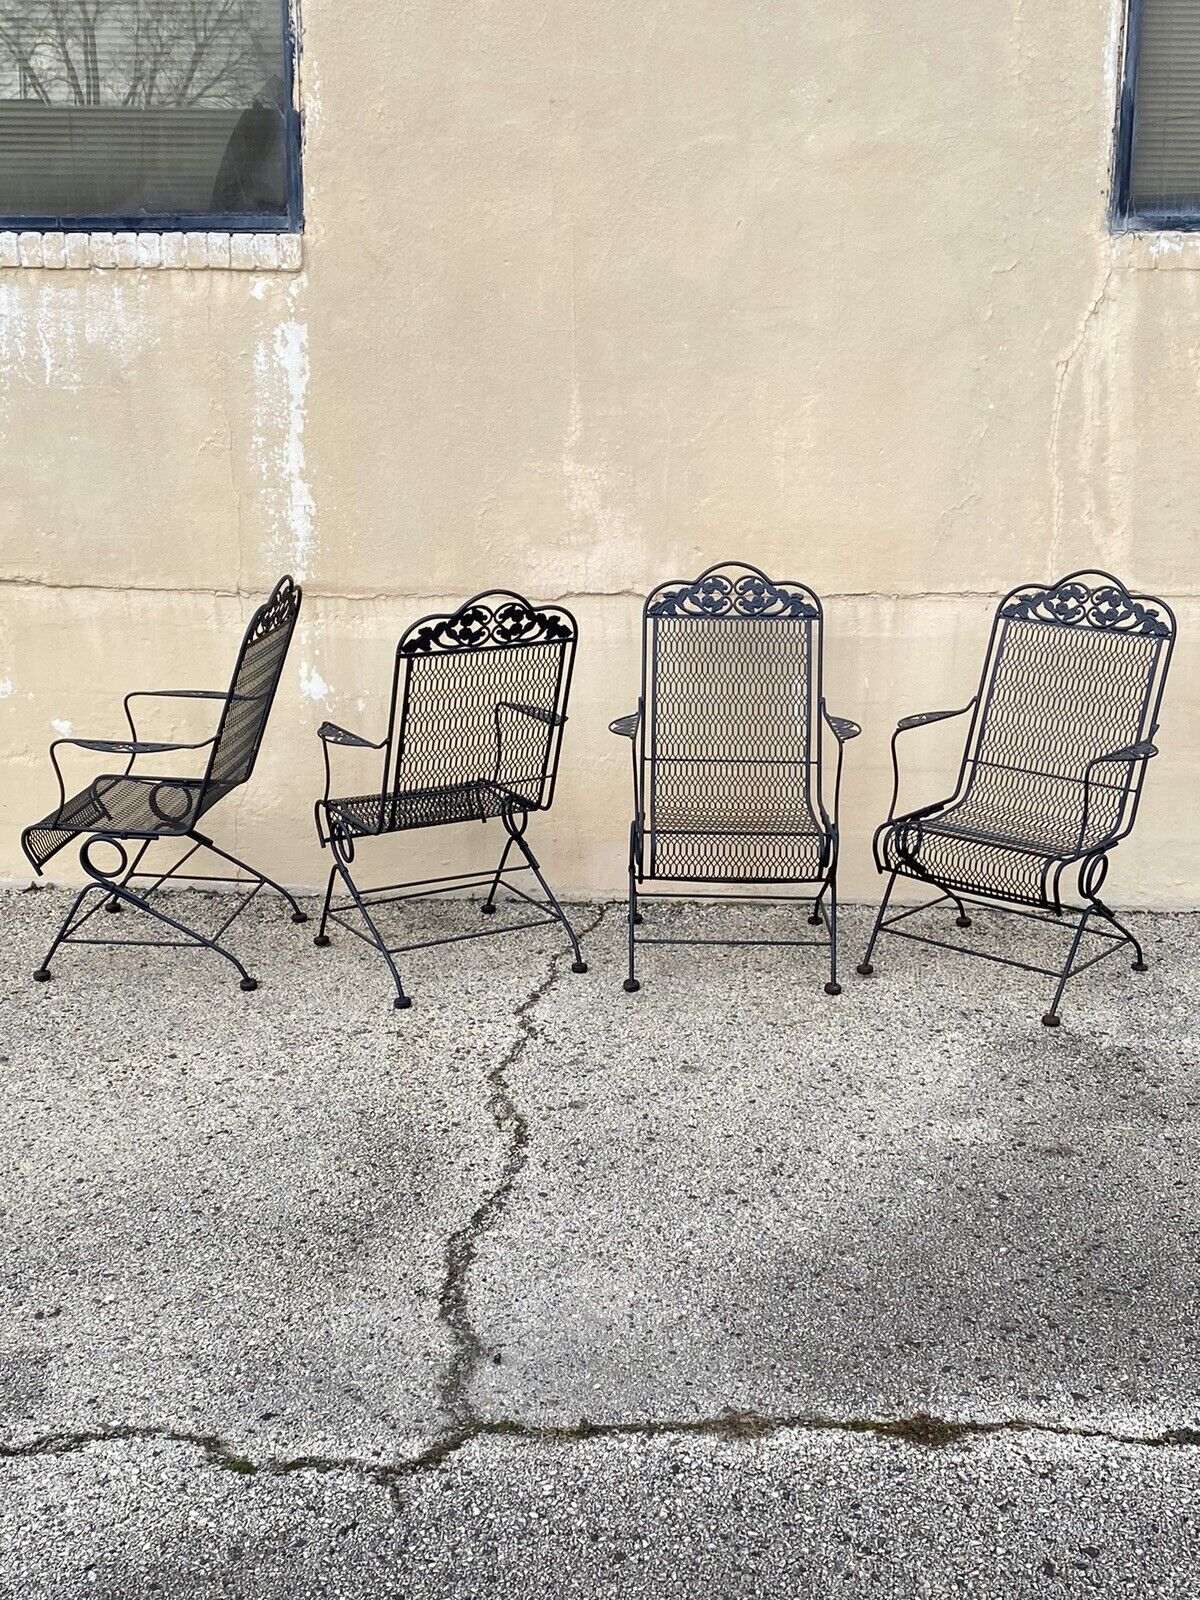 Vintage Wrought Iron Rose and Vine Pattern Garden Patio Chairs - 7 Pc Set